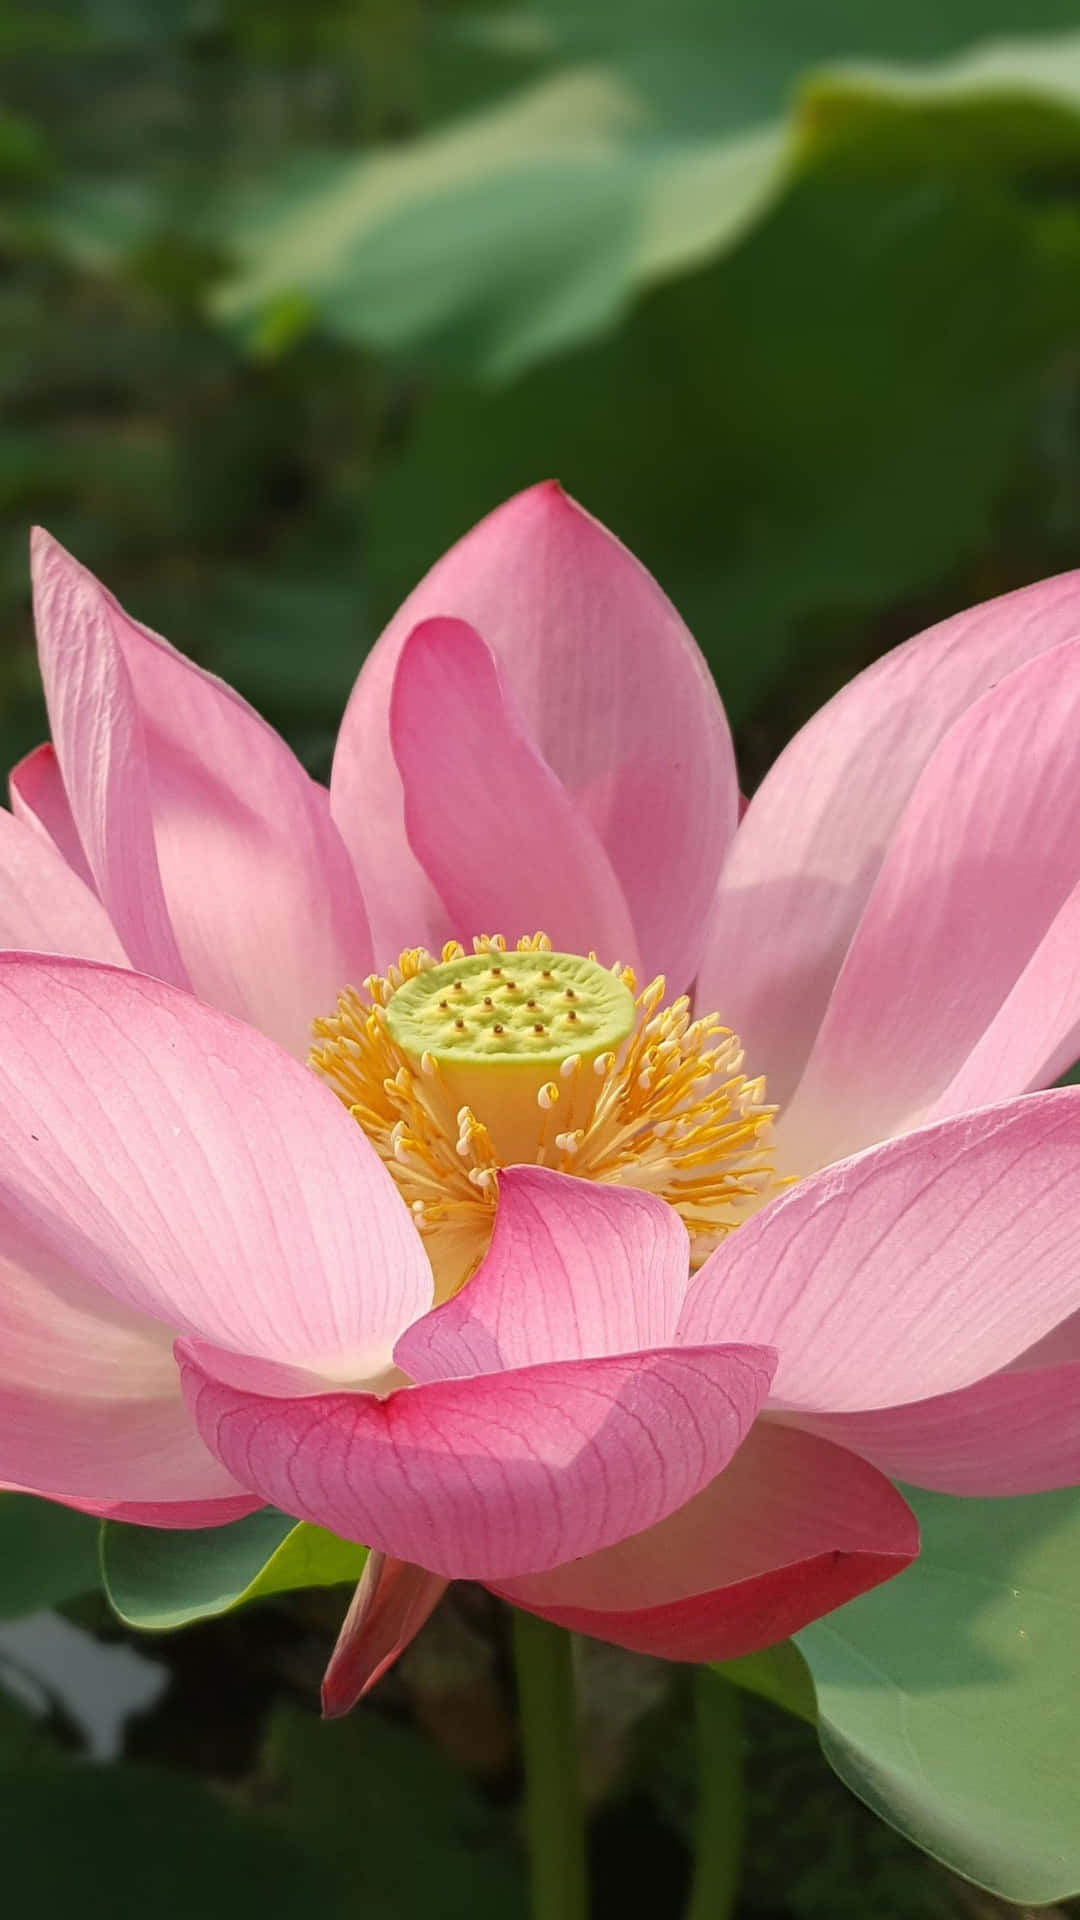 “The Simplicity of the Sacred Lotus”